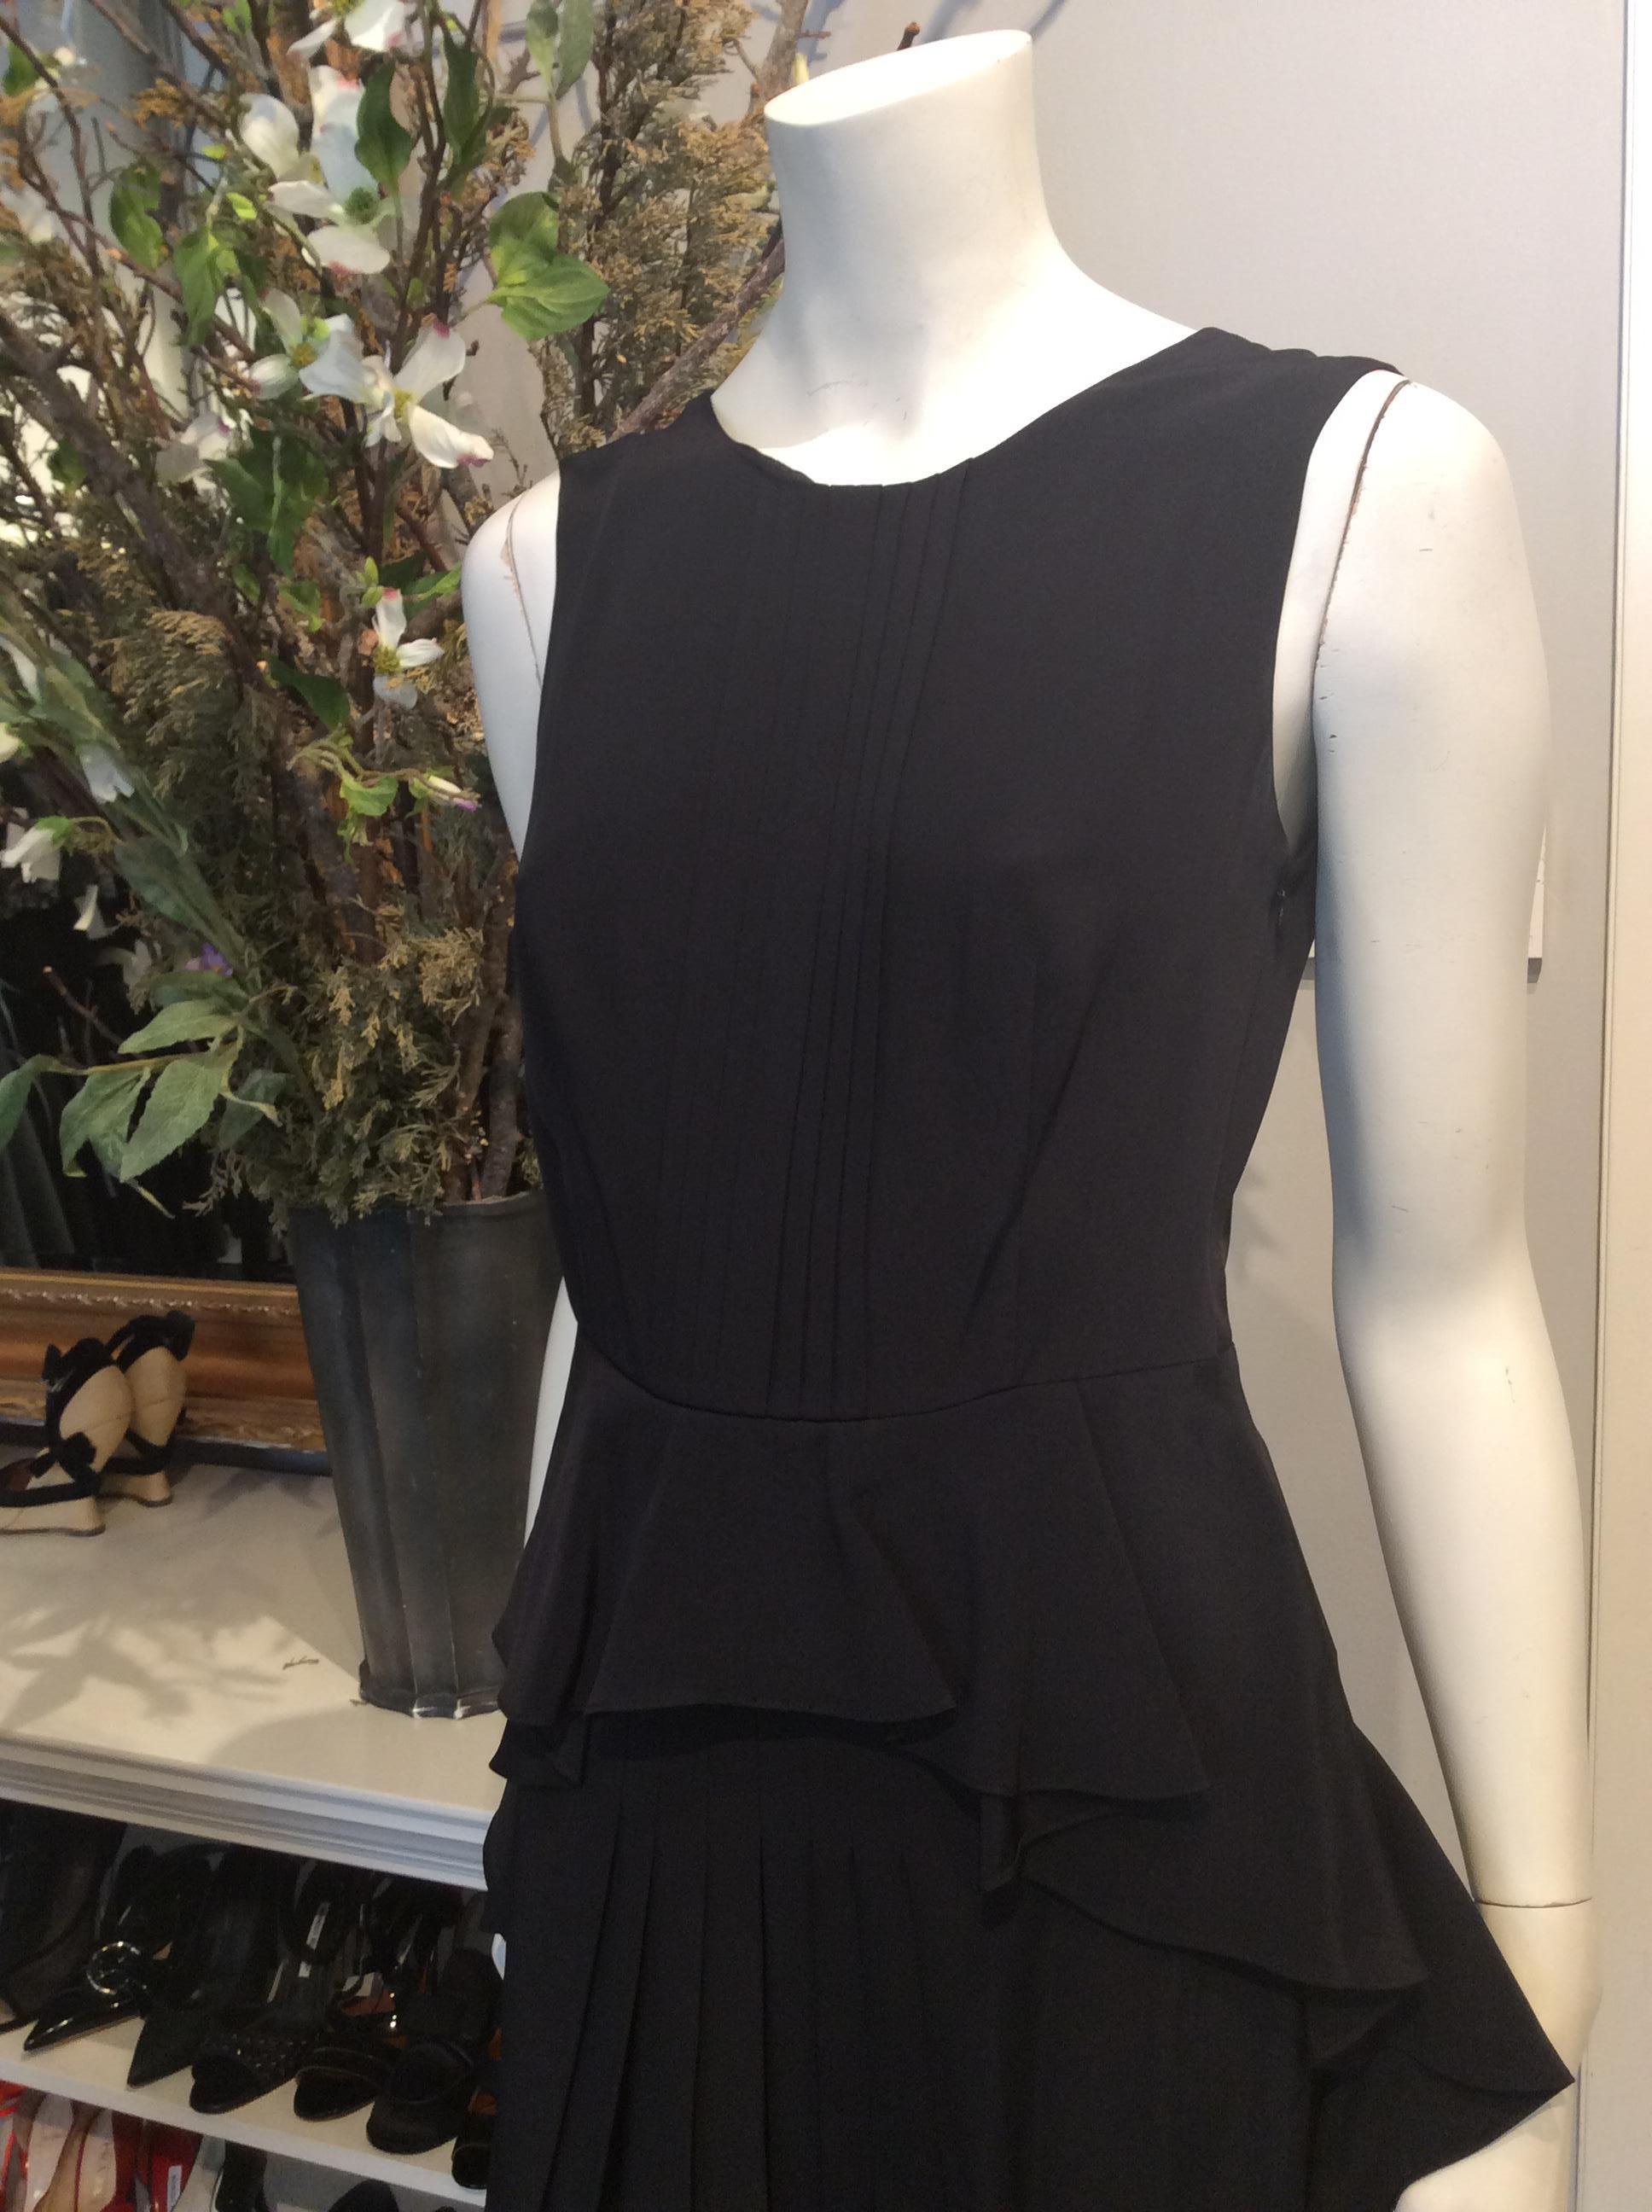 New Prada Black Silk Dress with Draping at Hips and Front Pleating Sz 42/Us6 In New Condition For Sale In San Francisco, CA